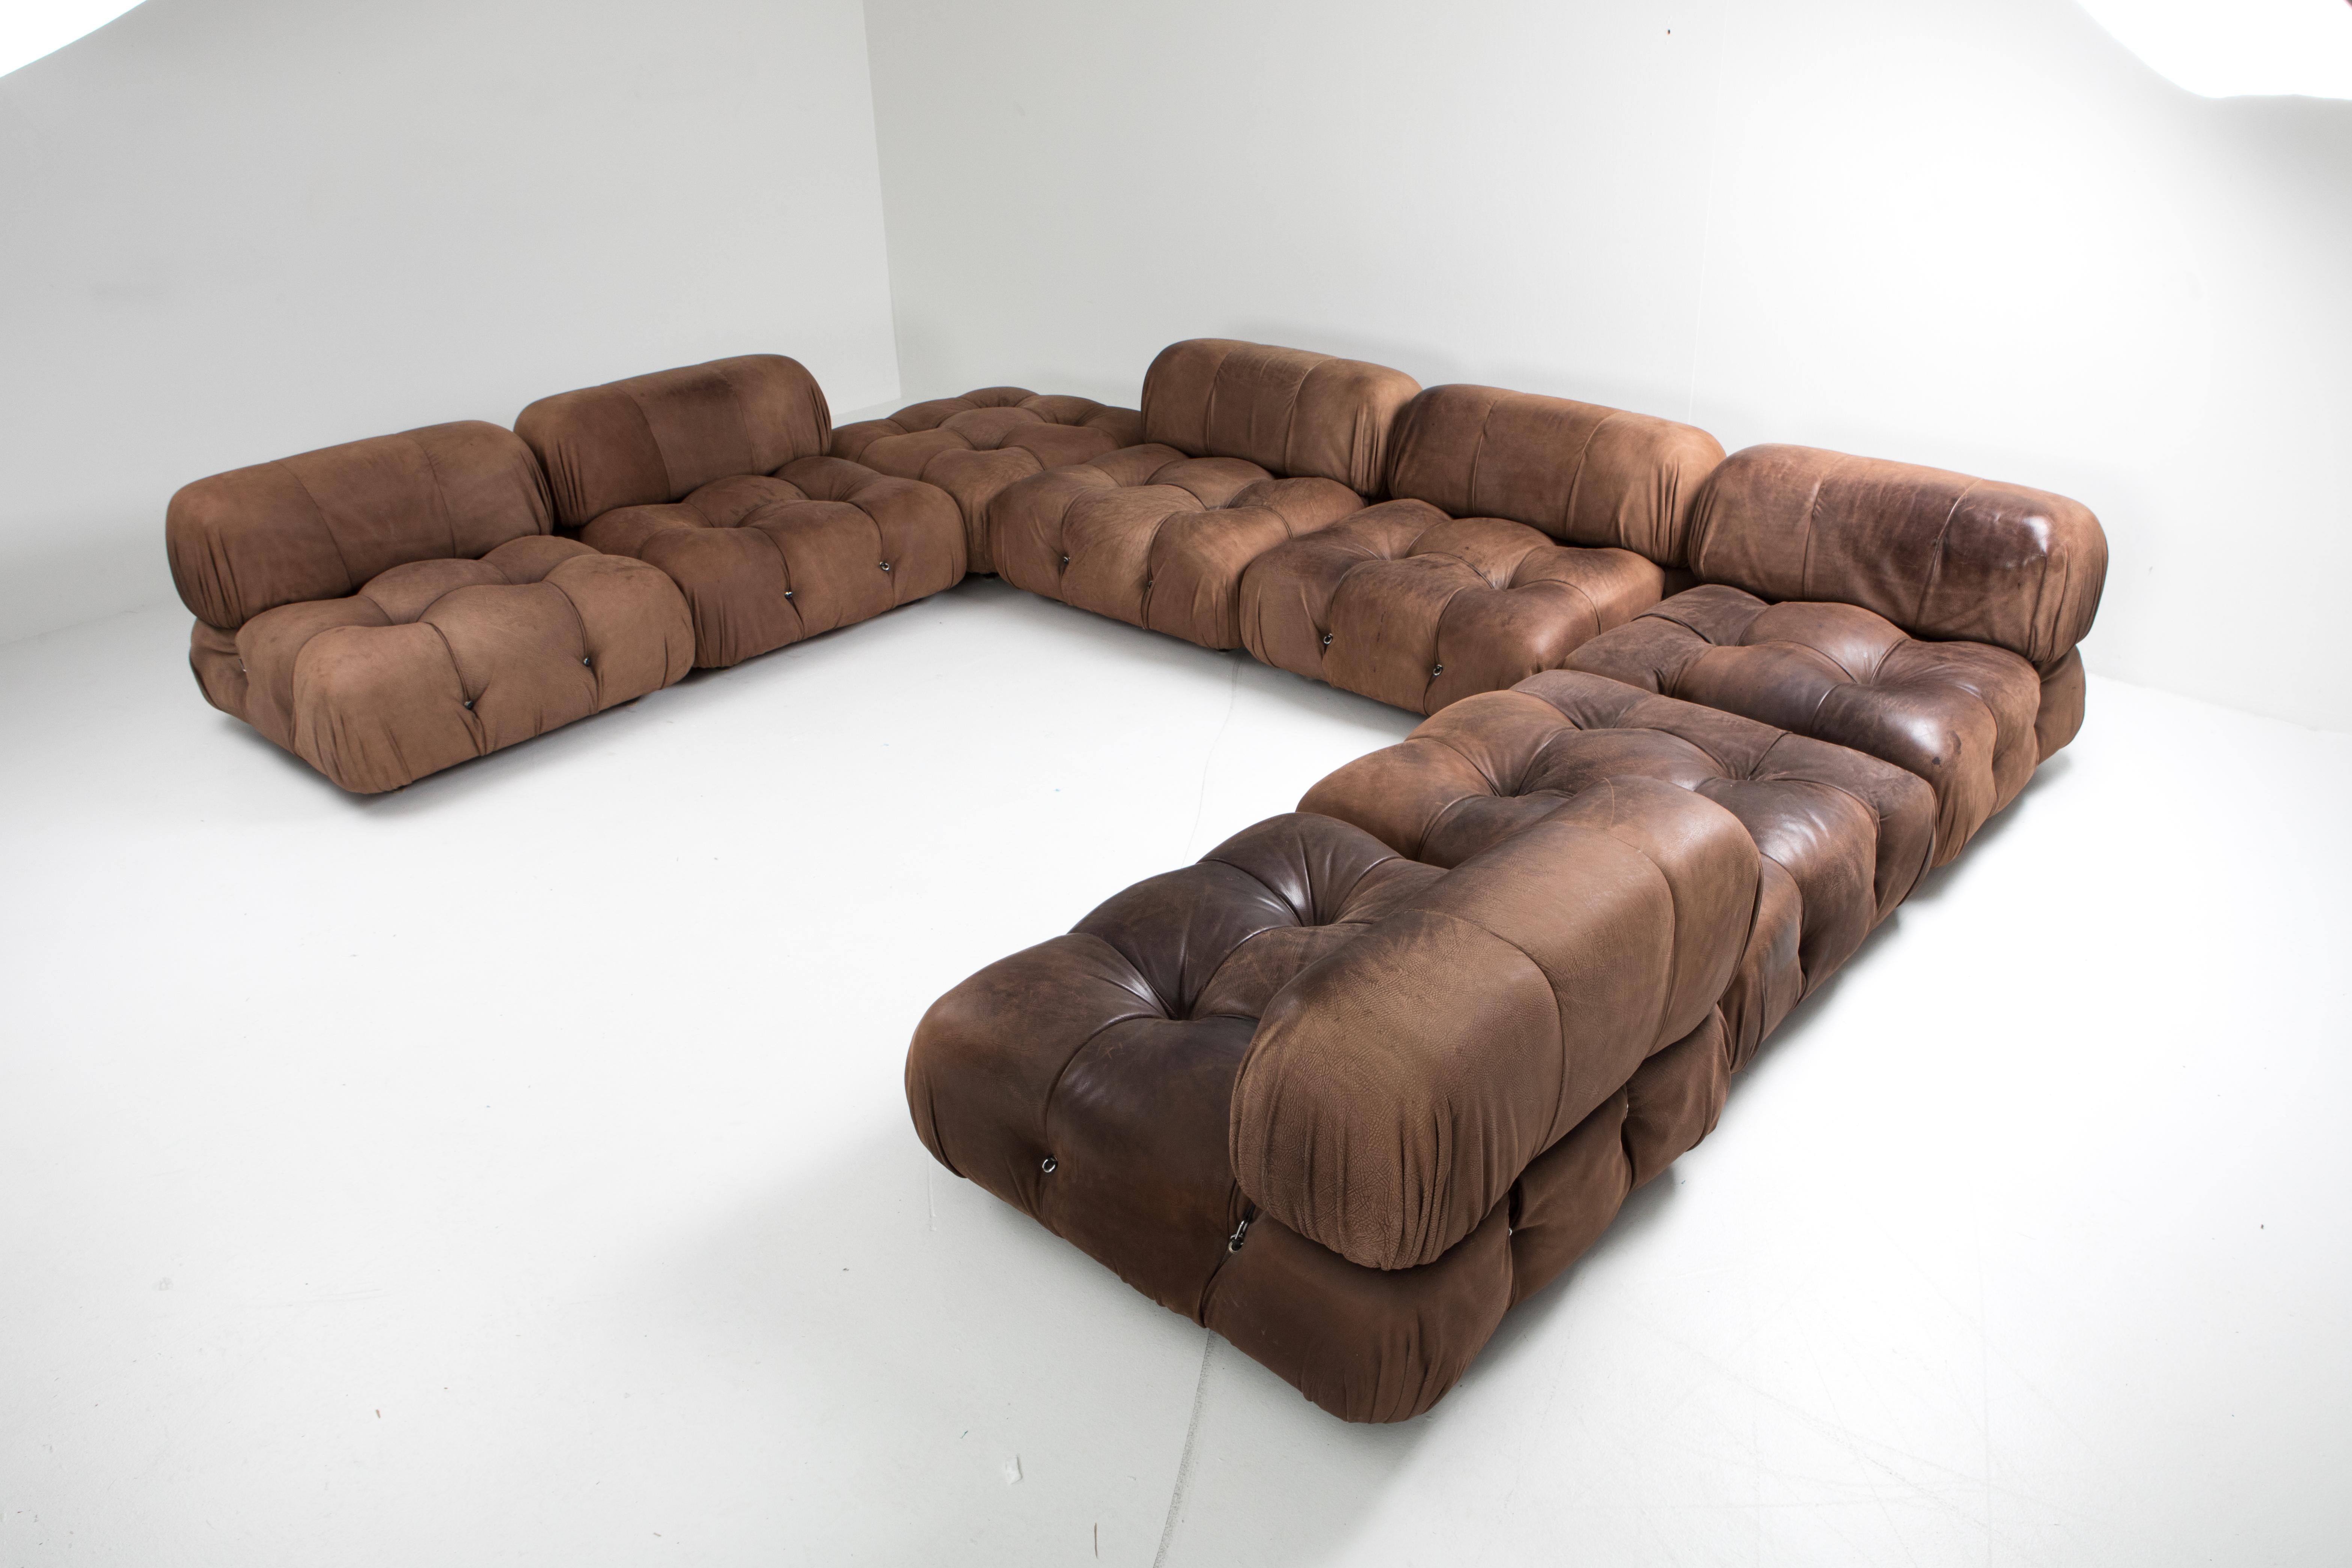 Camaleonda sectional couch in original brown buffalo leather, C&B Italia, 1970s, Mario Bellini

These are our best camaleonda pieces we've ever had.

Postmodern sectional piece by Mario Bellini for C&B Italia The entire listing consists of 8 big